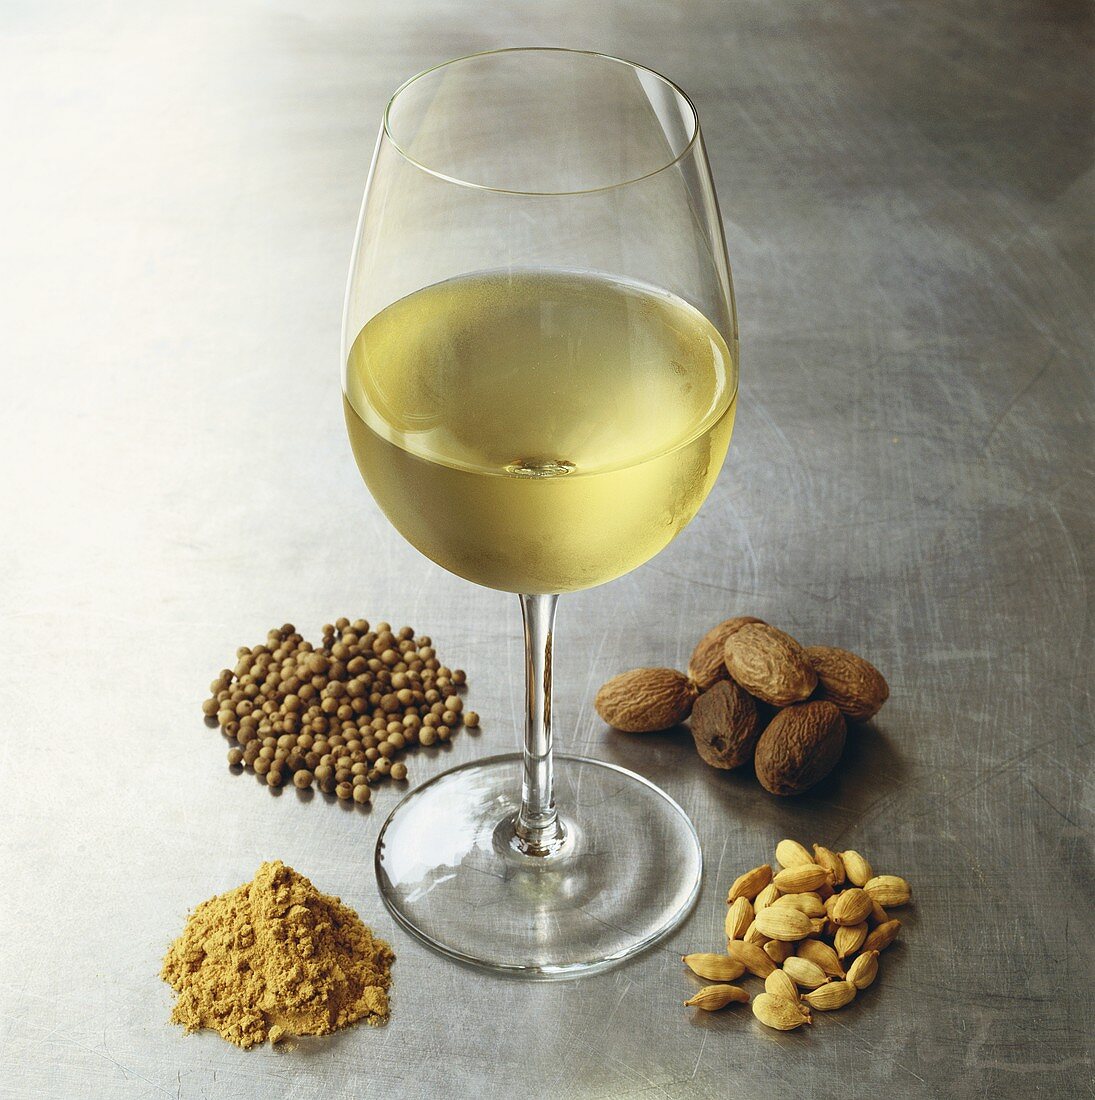 Glass of white wine surrounded by spices